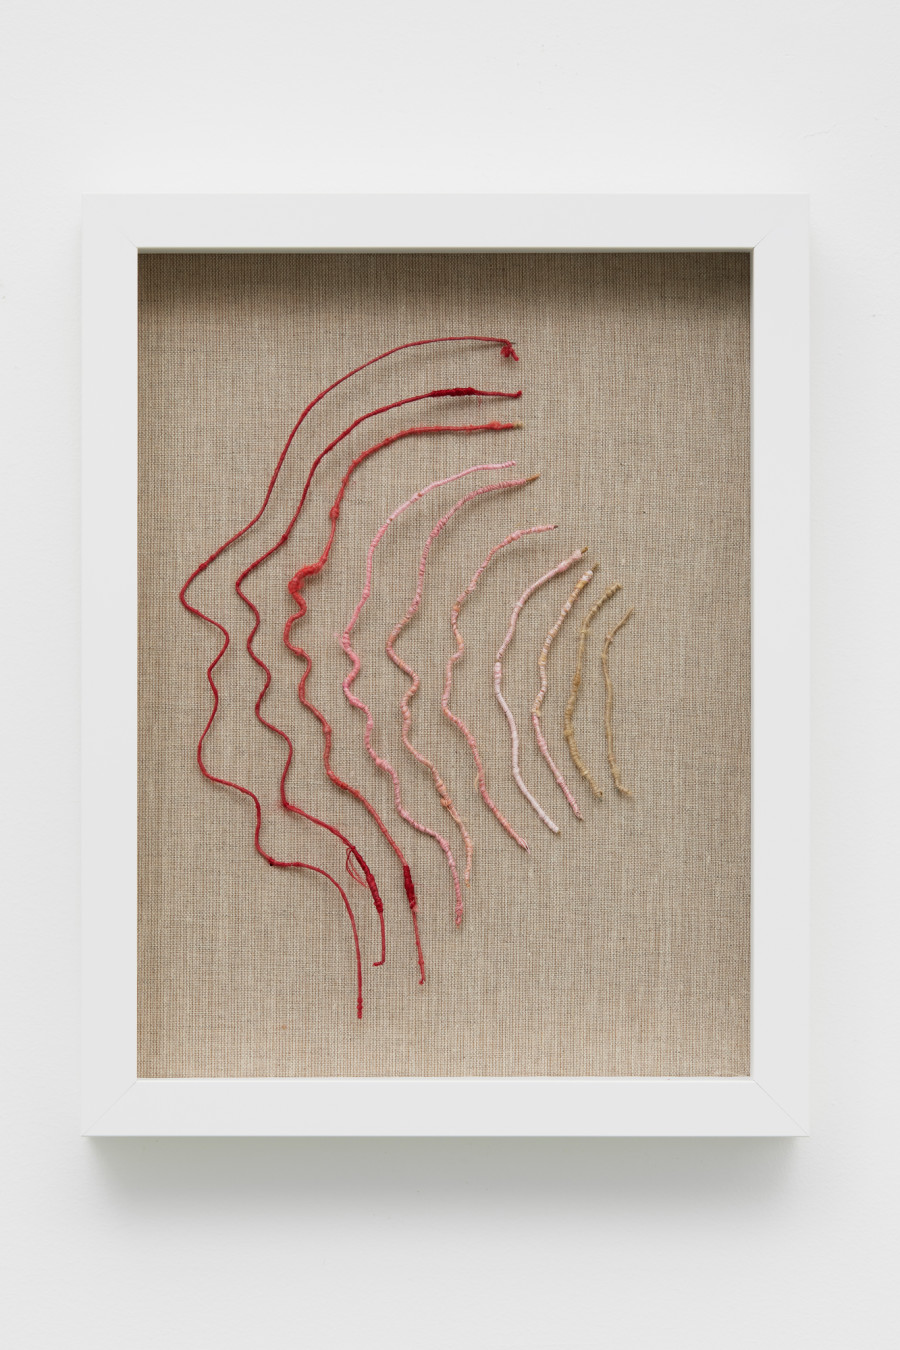 Soojin Kang, Untitled (drawing), 2022, Silk and wire, framed, 44 x 34 cm (frame). Courtesy: the artist and Ben Hunter, London. Photo: Hannes Heinzer